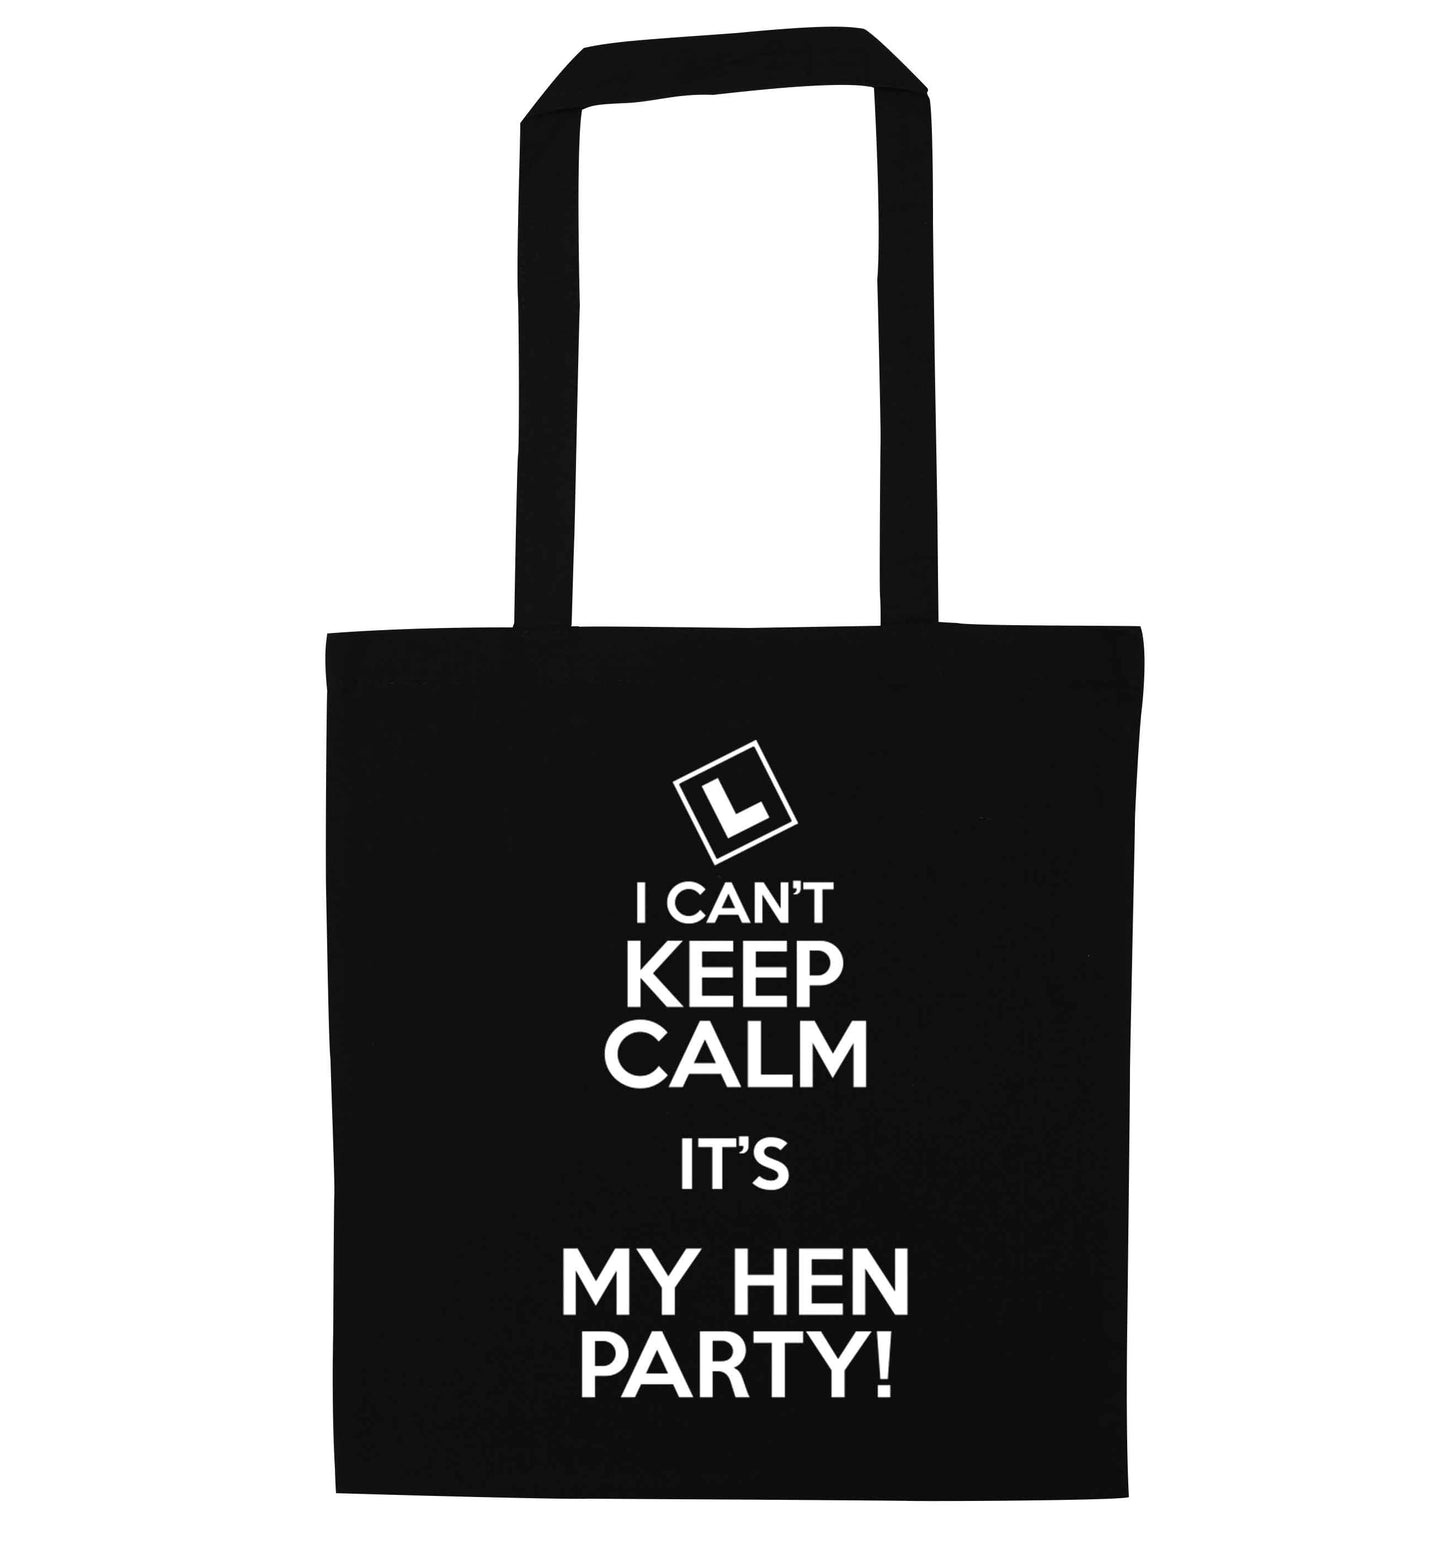 I can't keep calm it's my hen party black tote bag